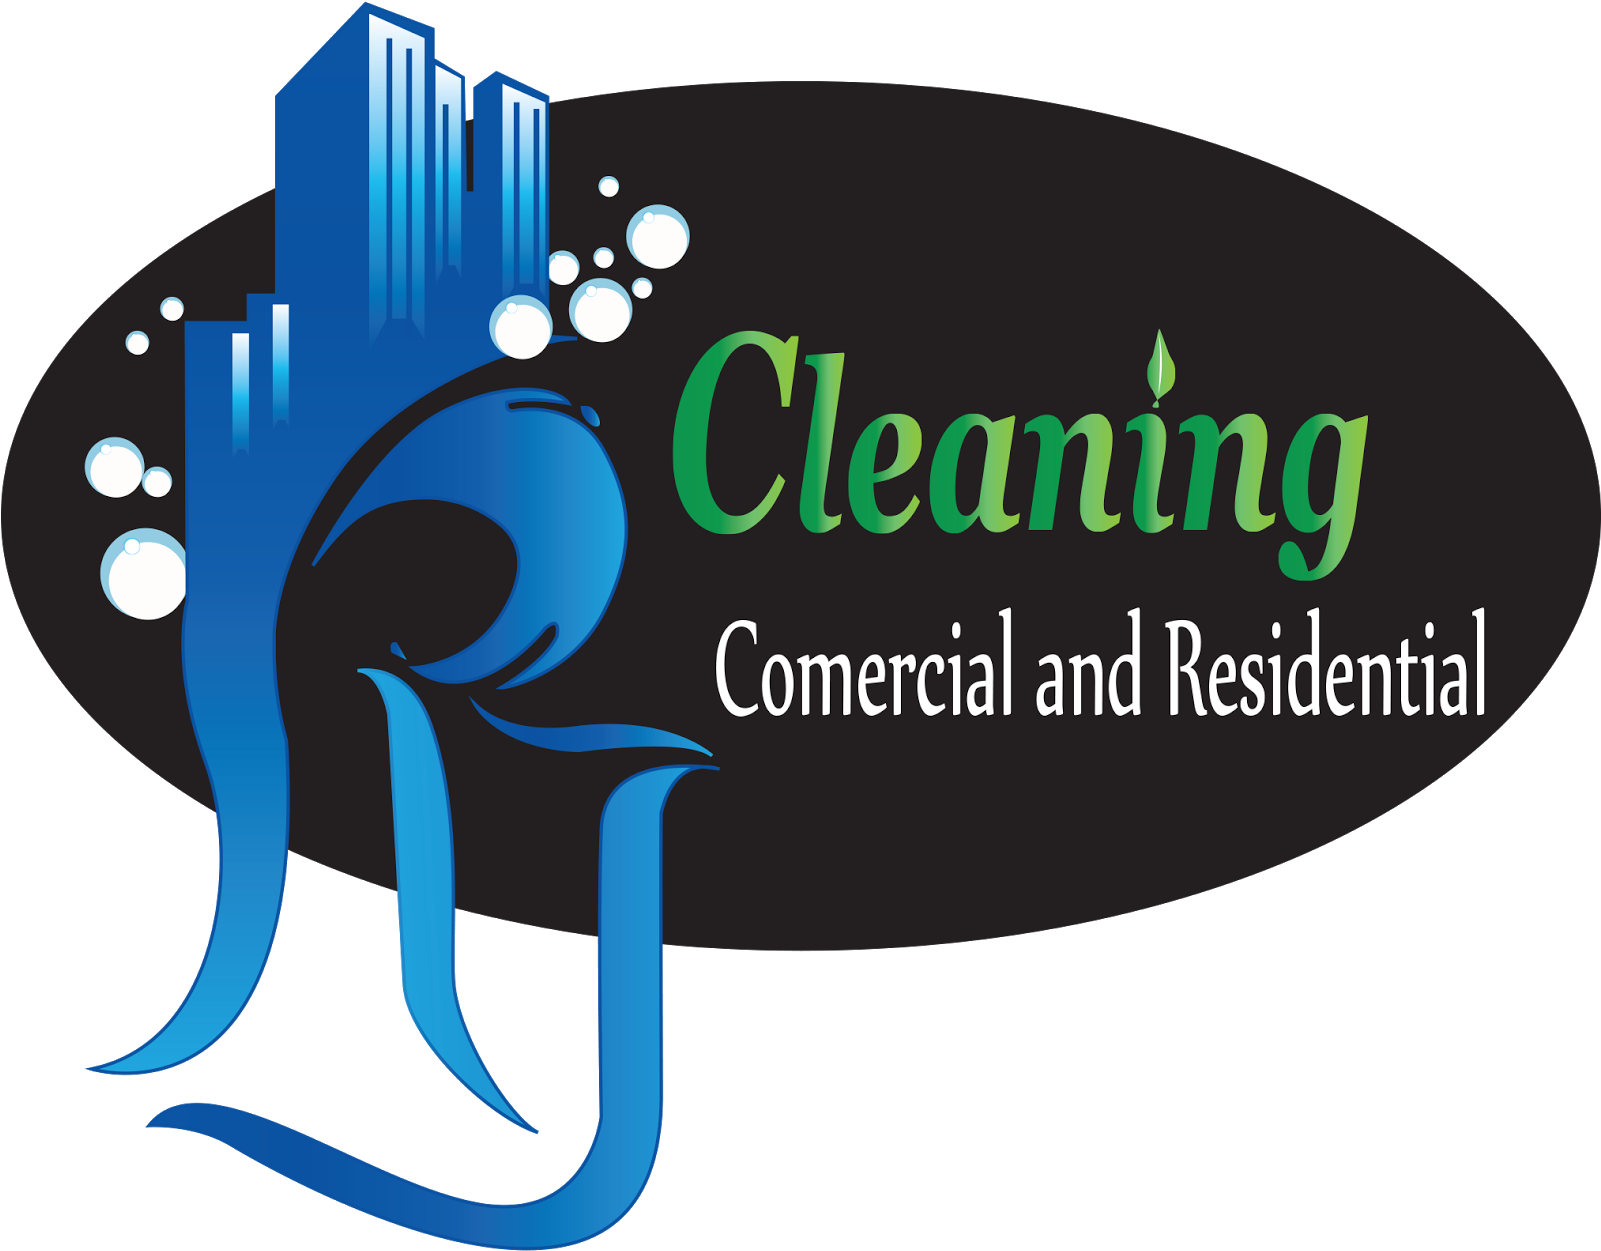 Rj Cleaning Services - Graphic Design (1600x1446)